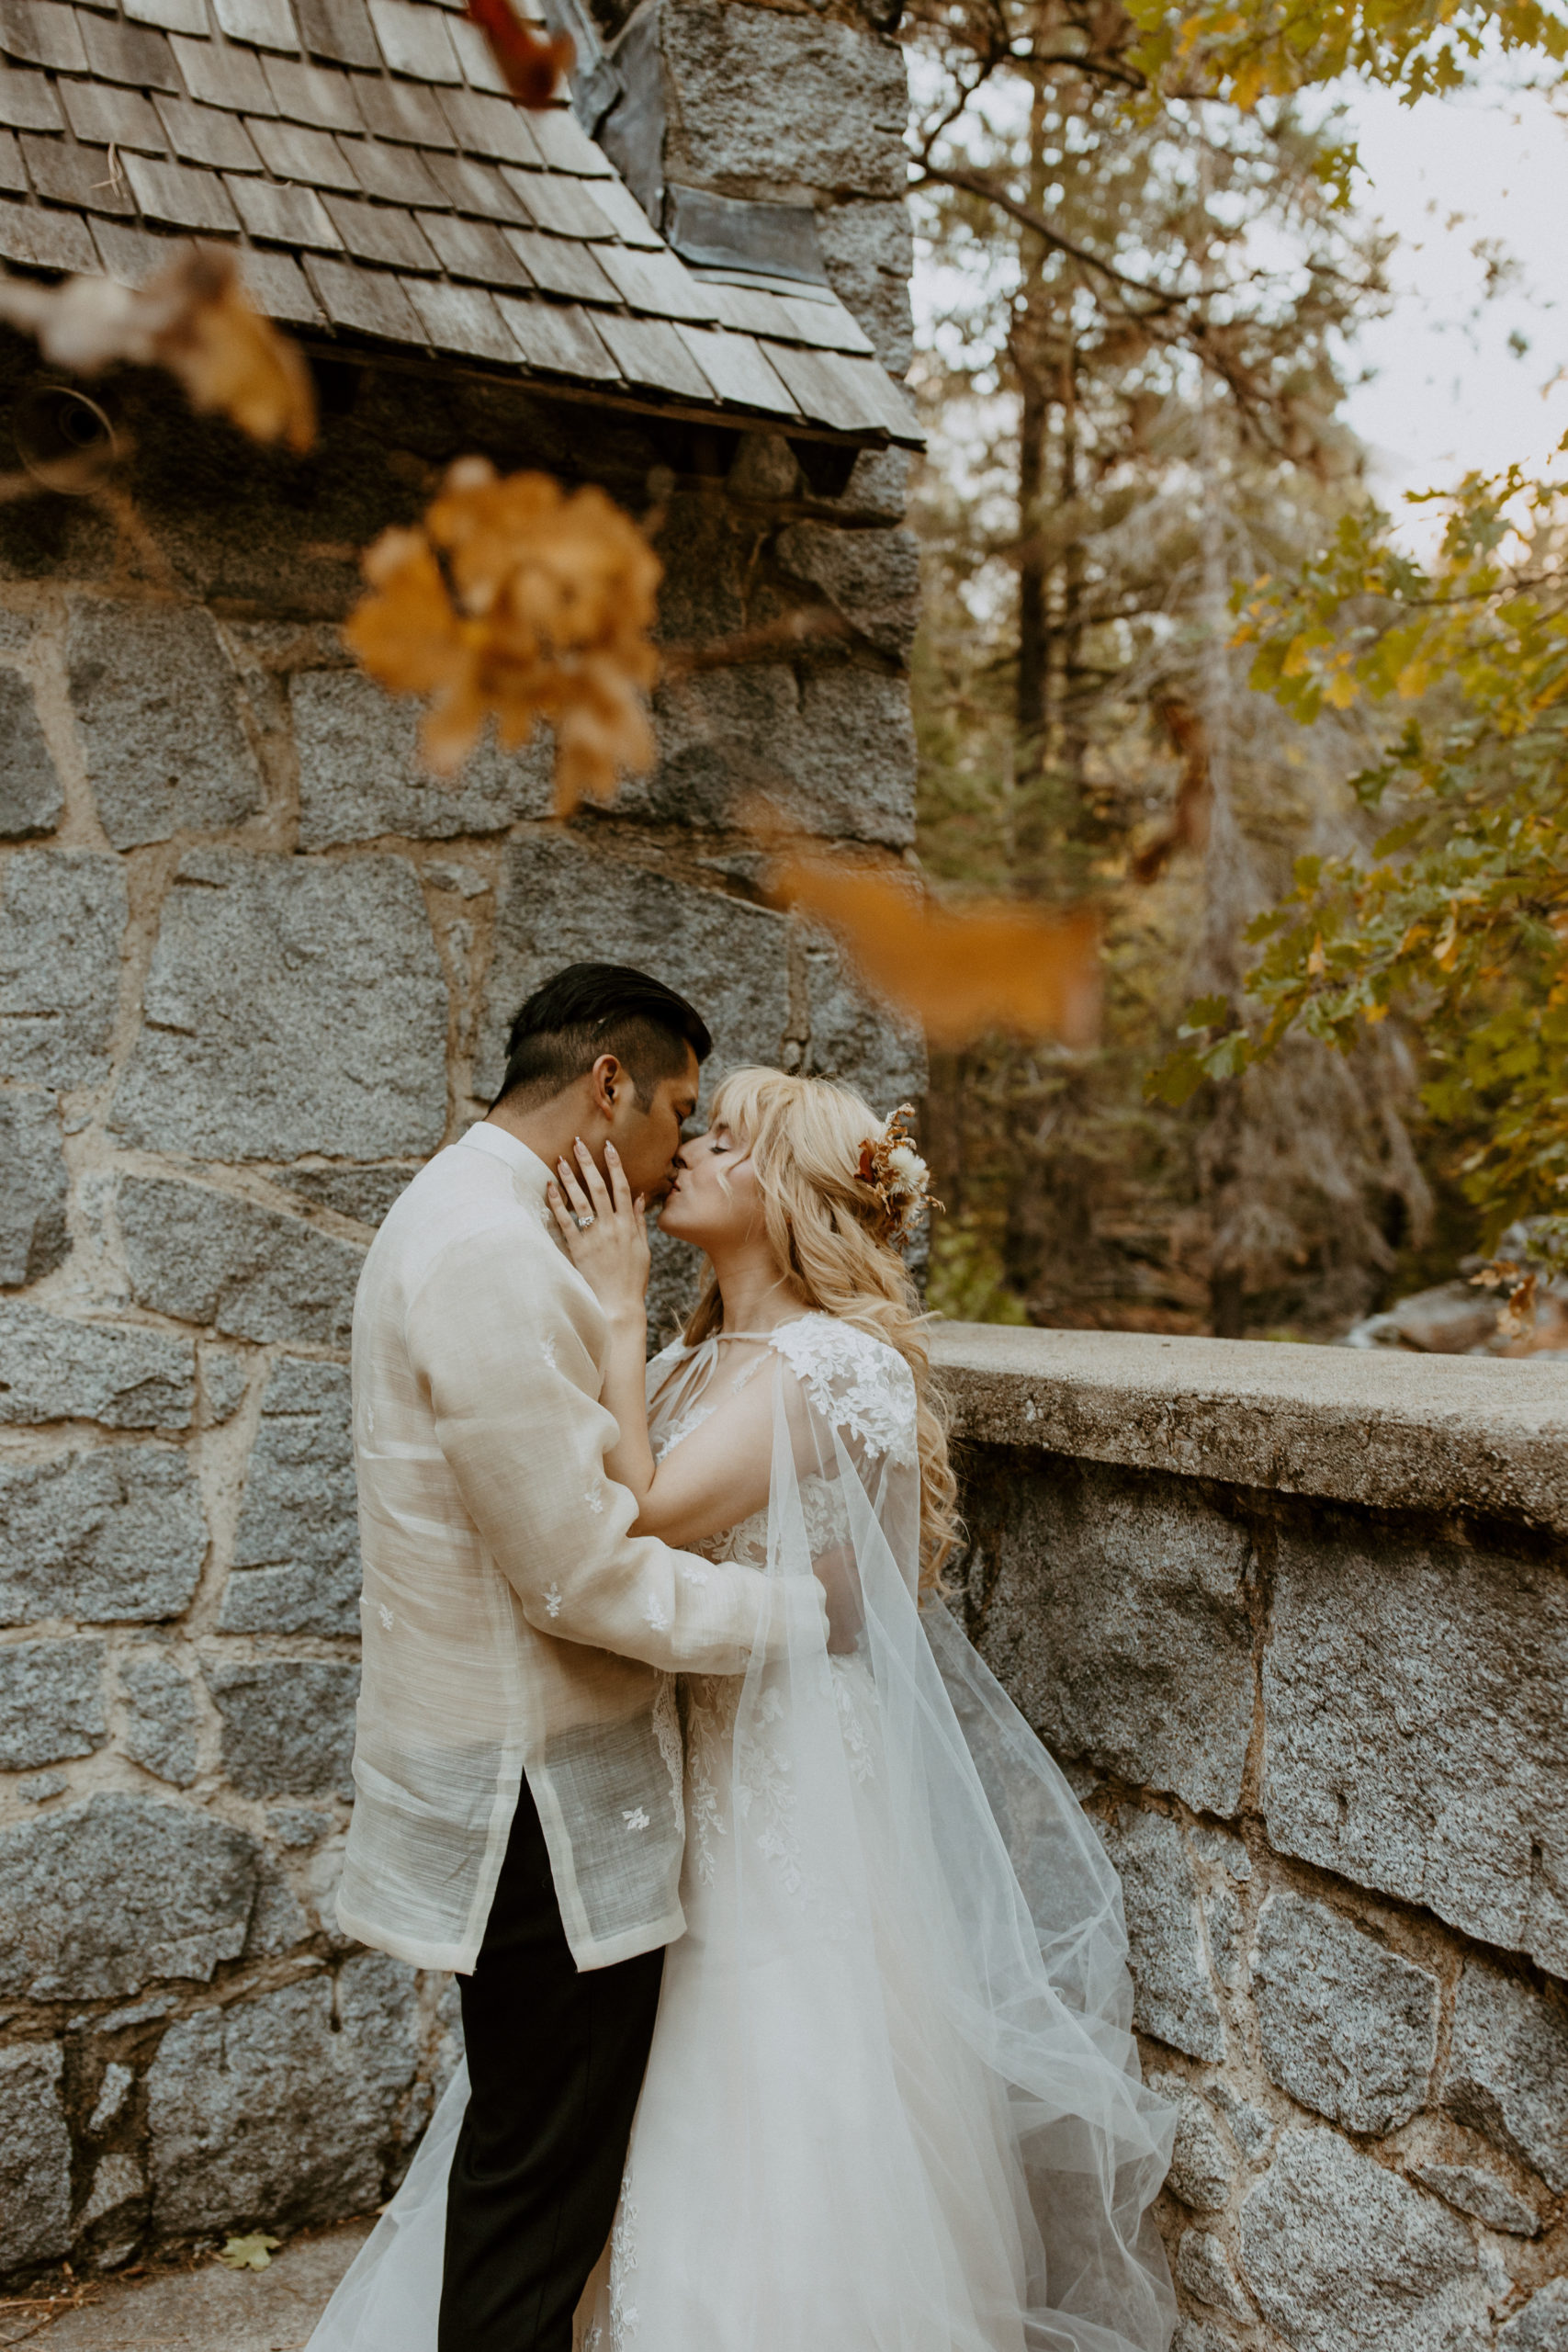 the couple kissing as fall leaves fall